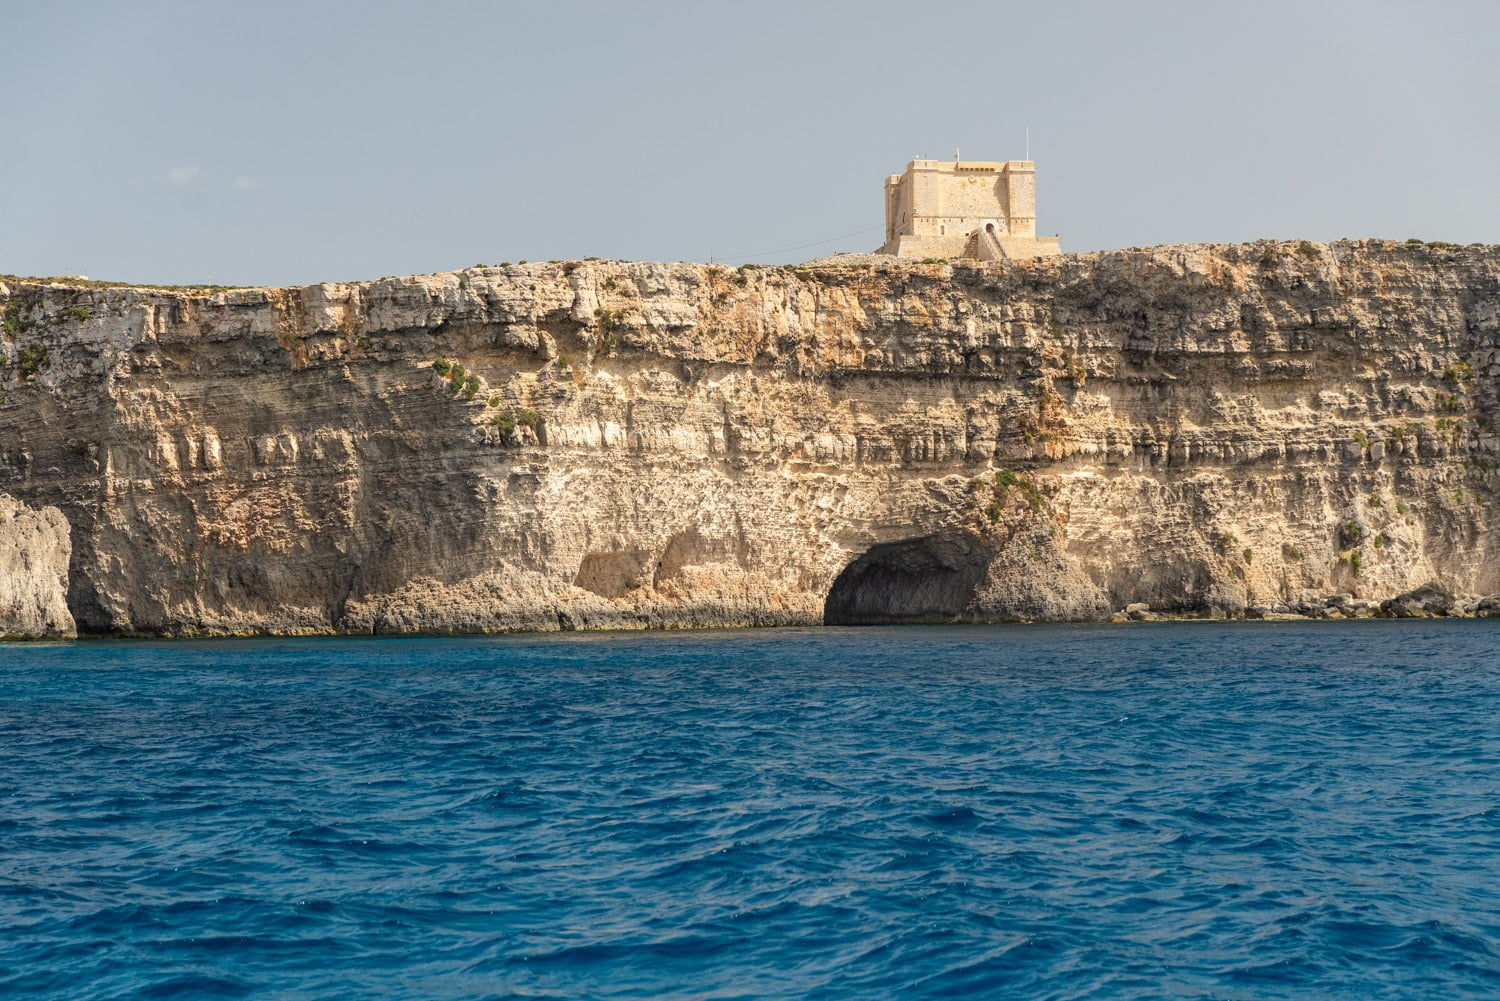 Count of Monte Cristo castle from the ocean